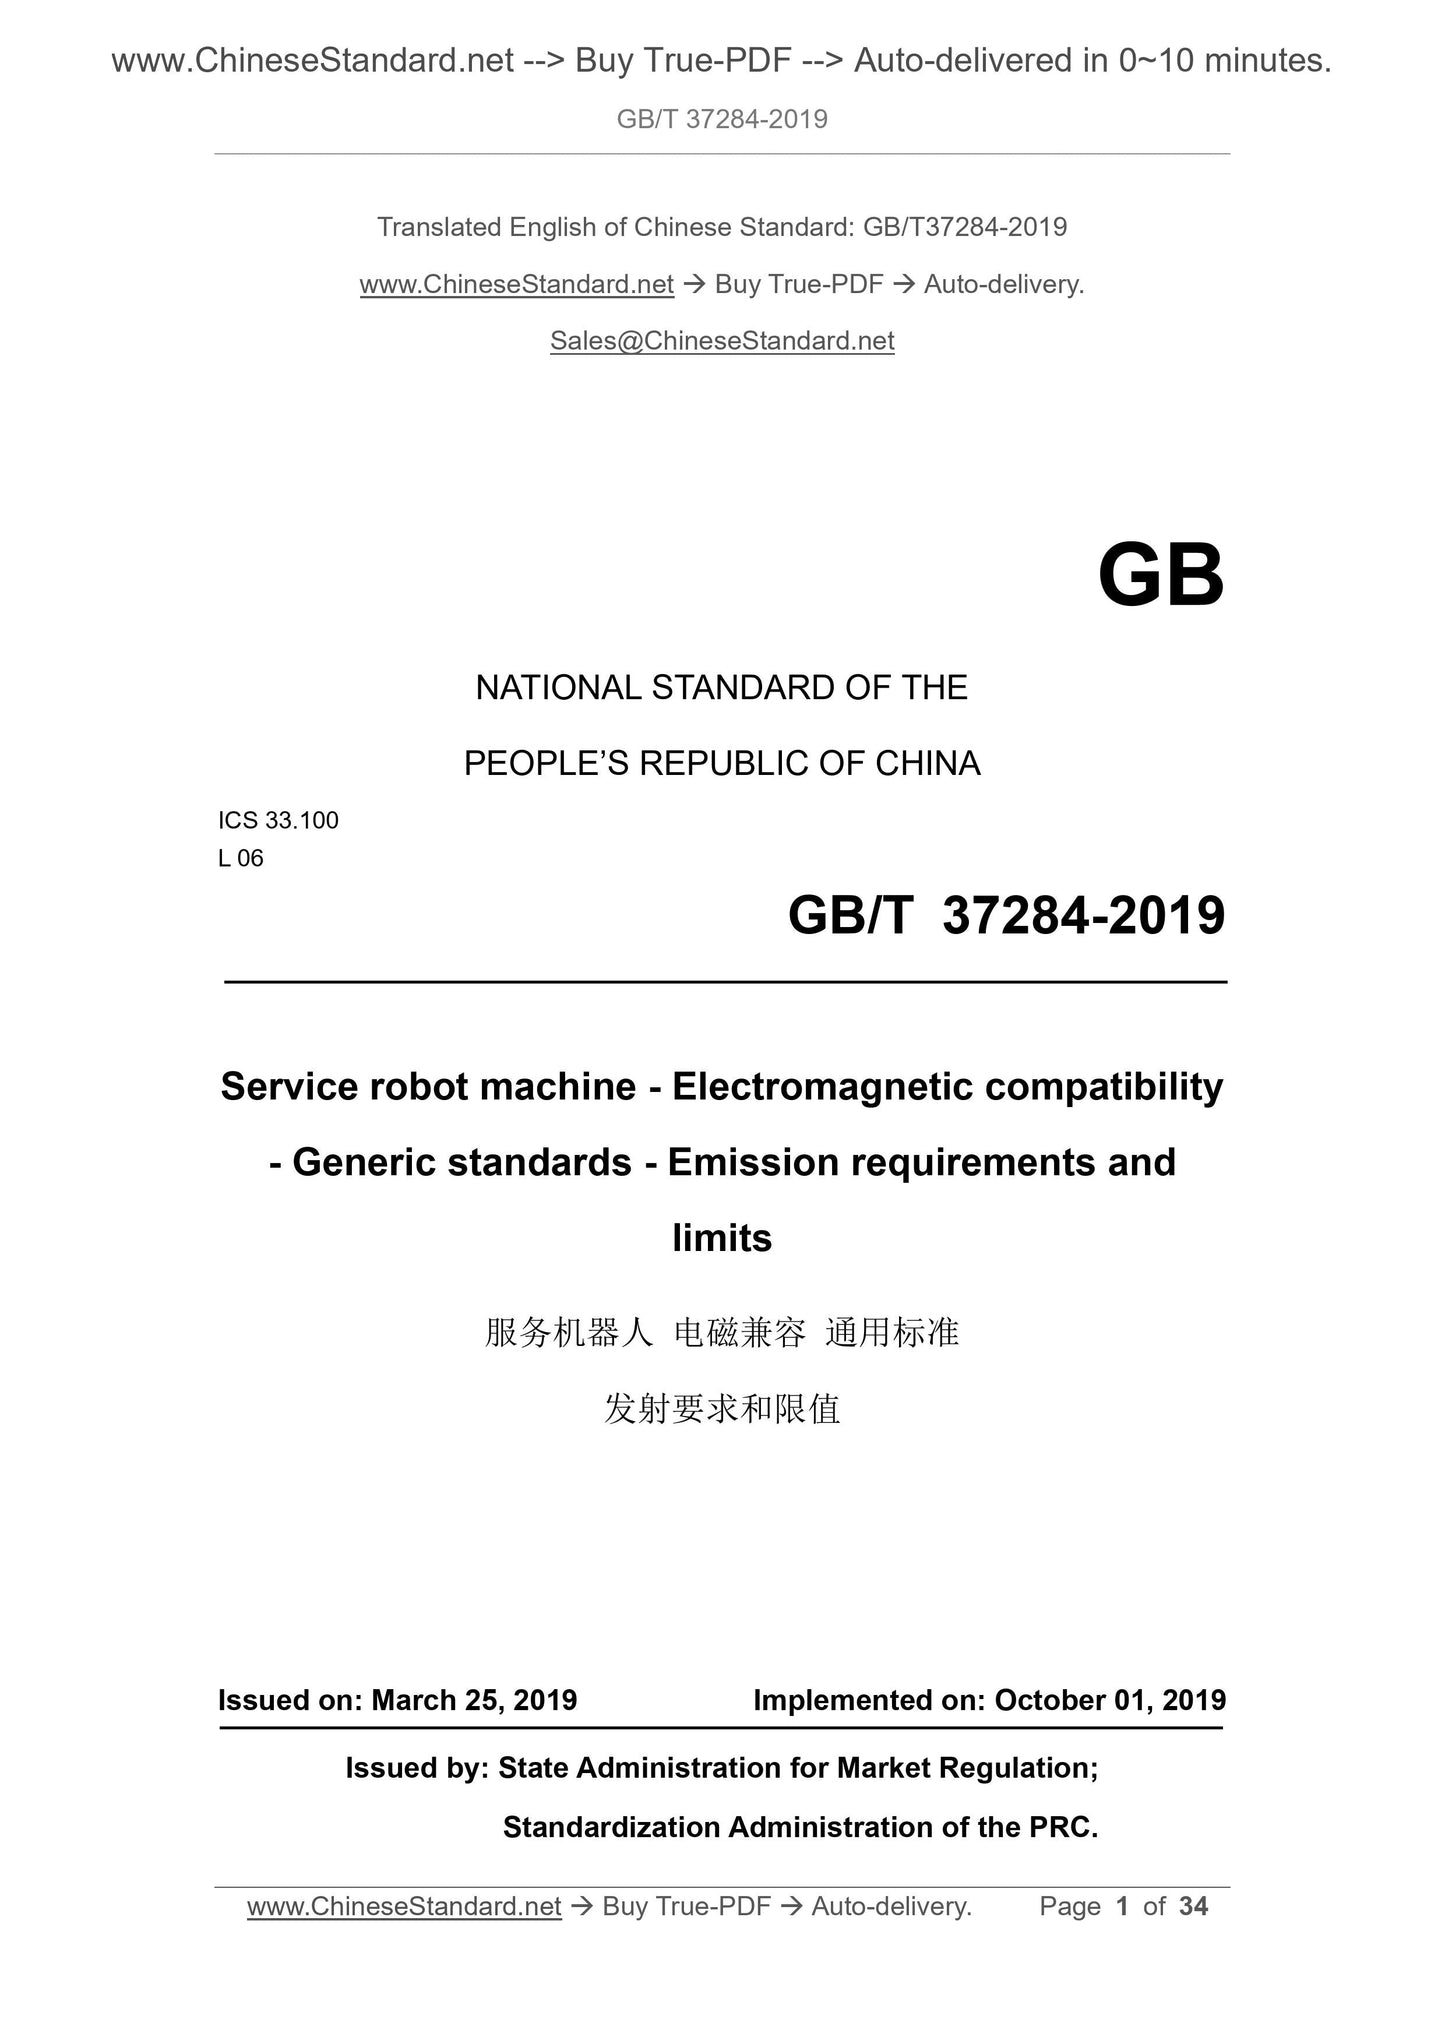 GB/T 37284-2019 Page 1